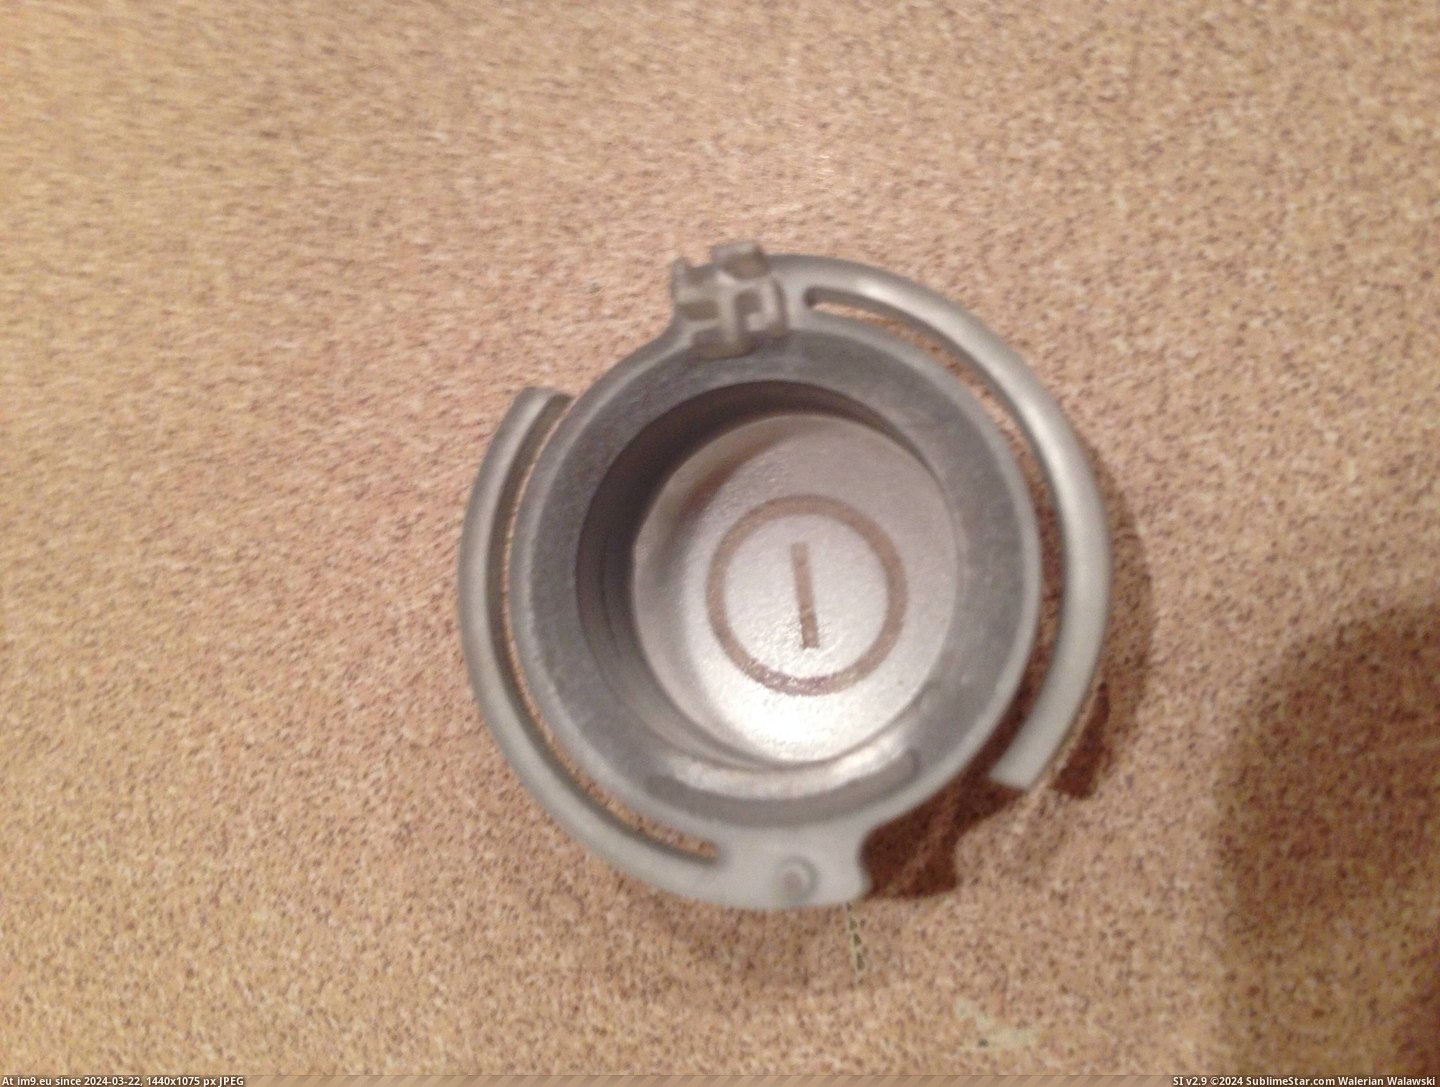 #Power #Button #Swastika #Dryer #Backside [Mildlyinteresting] There is a swastika on the backside of the power button for my dryer. Pic. (Bild von album My r/MILDLYINTERESTING favs))